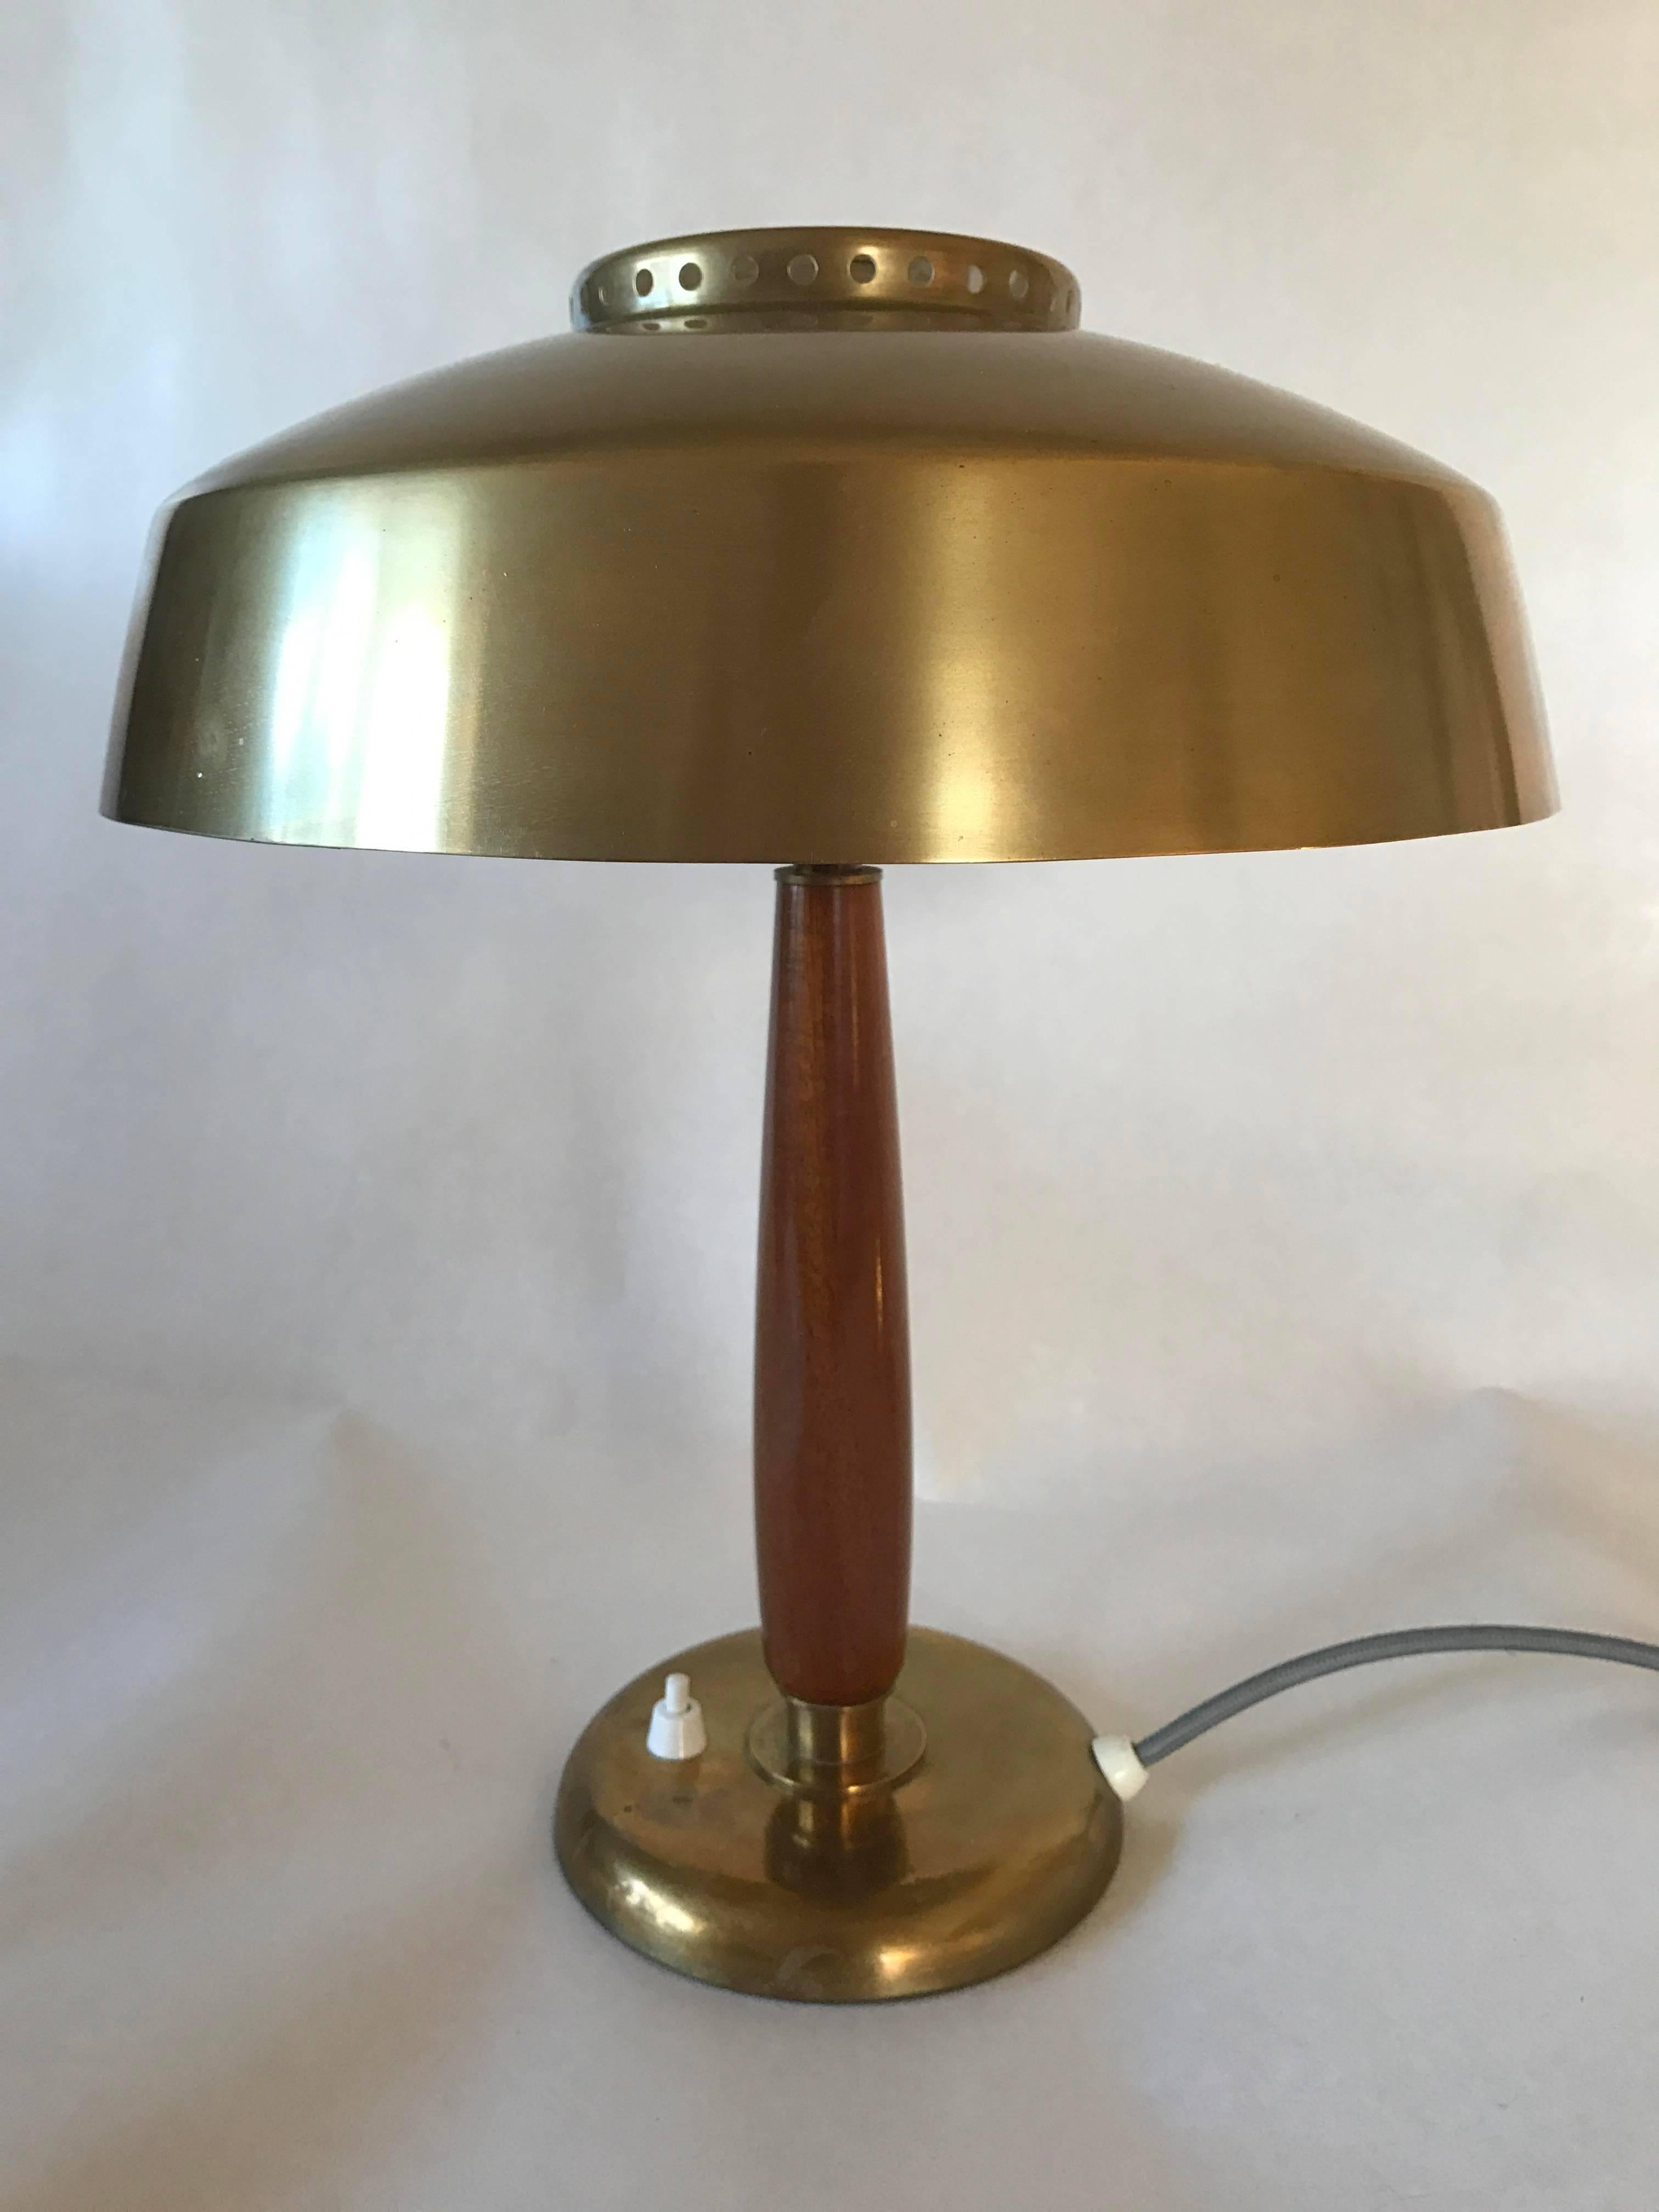 1940-1950 Swedish brass and oak table lamp Hans Bergström. A nice and rare Swedish modern table lamp made of brass and oak. The height of the lamp is 36cm and the diameter of the shade is 30cm. The lamp is in a fantastic condition and all cords has